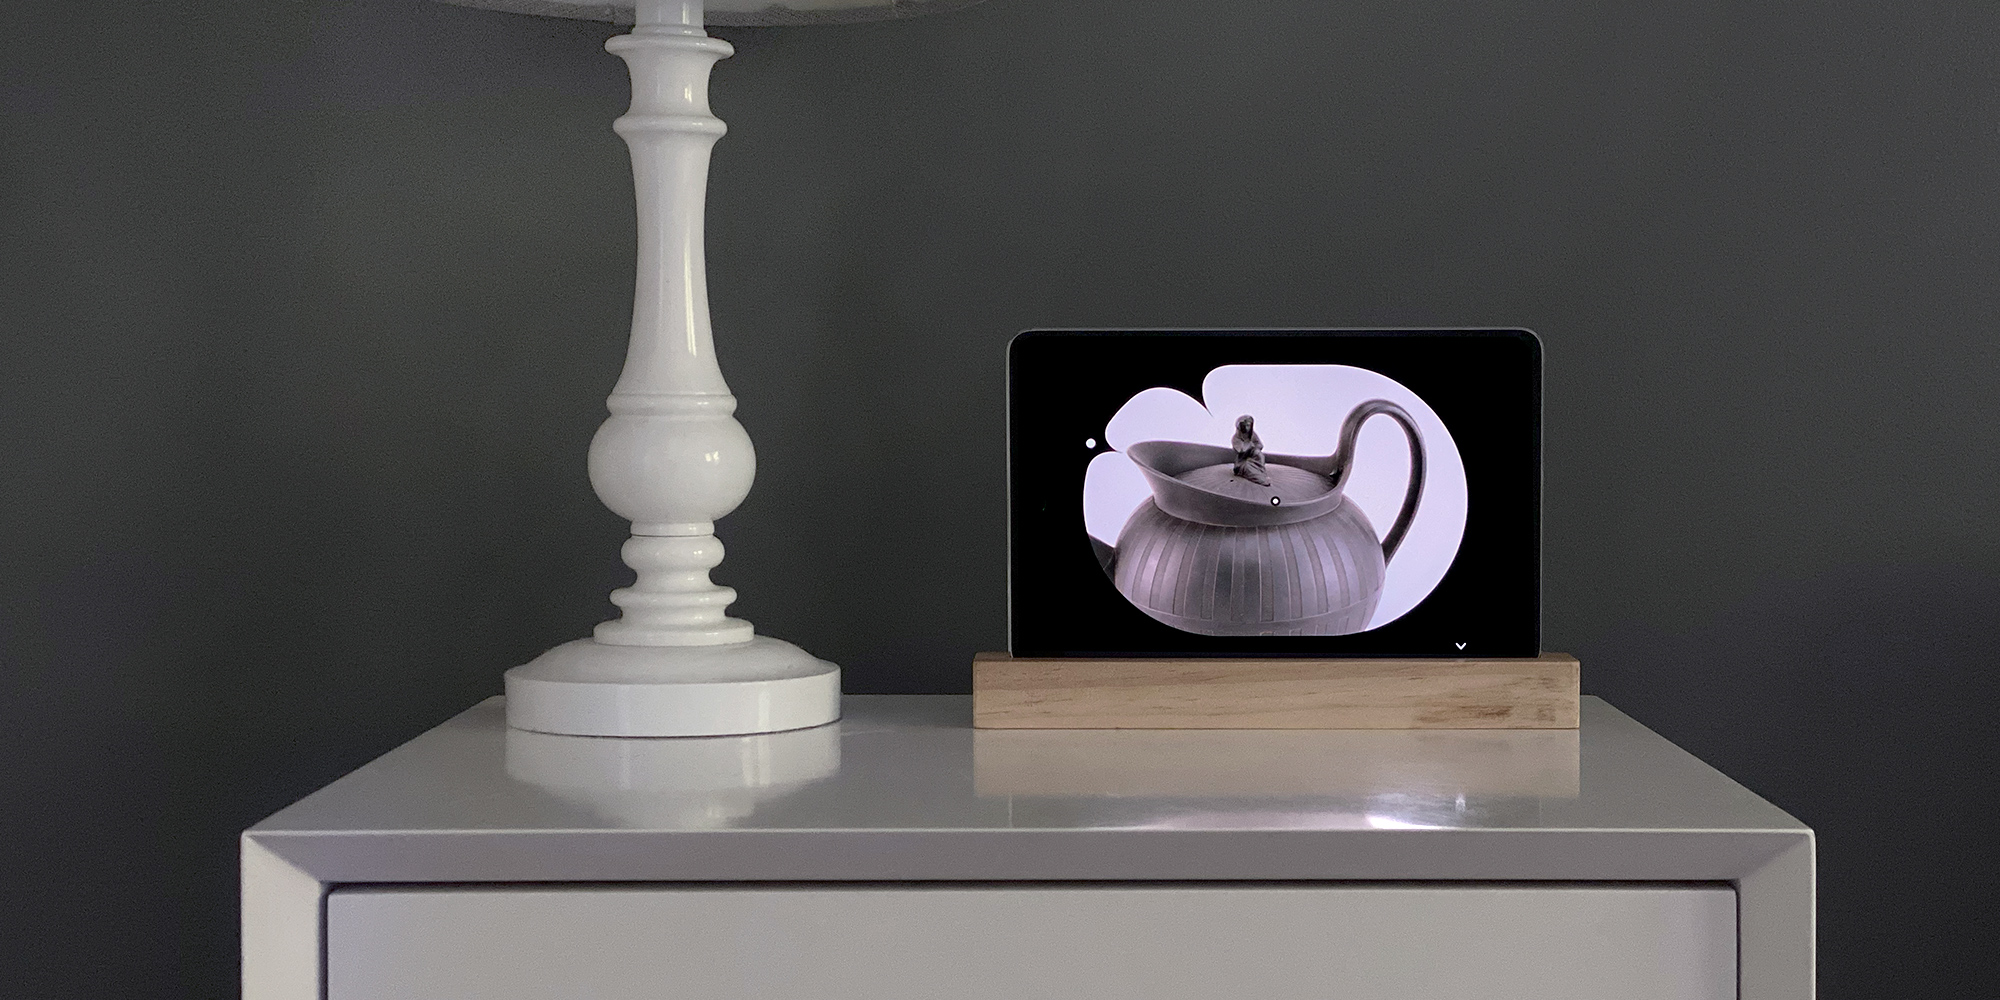 Art Clock interface being visualized on a tablet that is sitting in a stand on top of a gray cabinet next to a decorative white candlestick. The interface itself shows a stylized clock at 11:50 with the clock hands aligning to different parts of the teapot it displays.